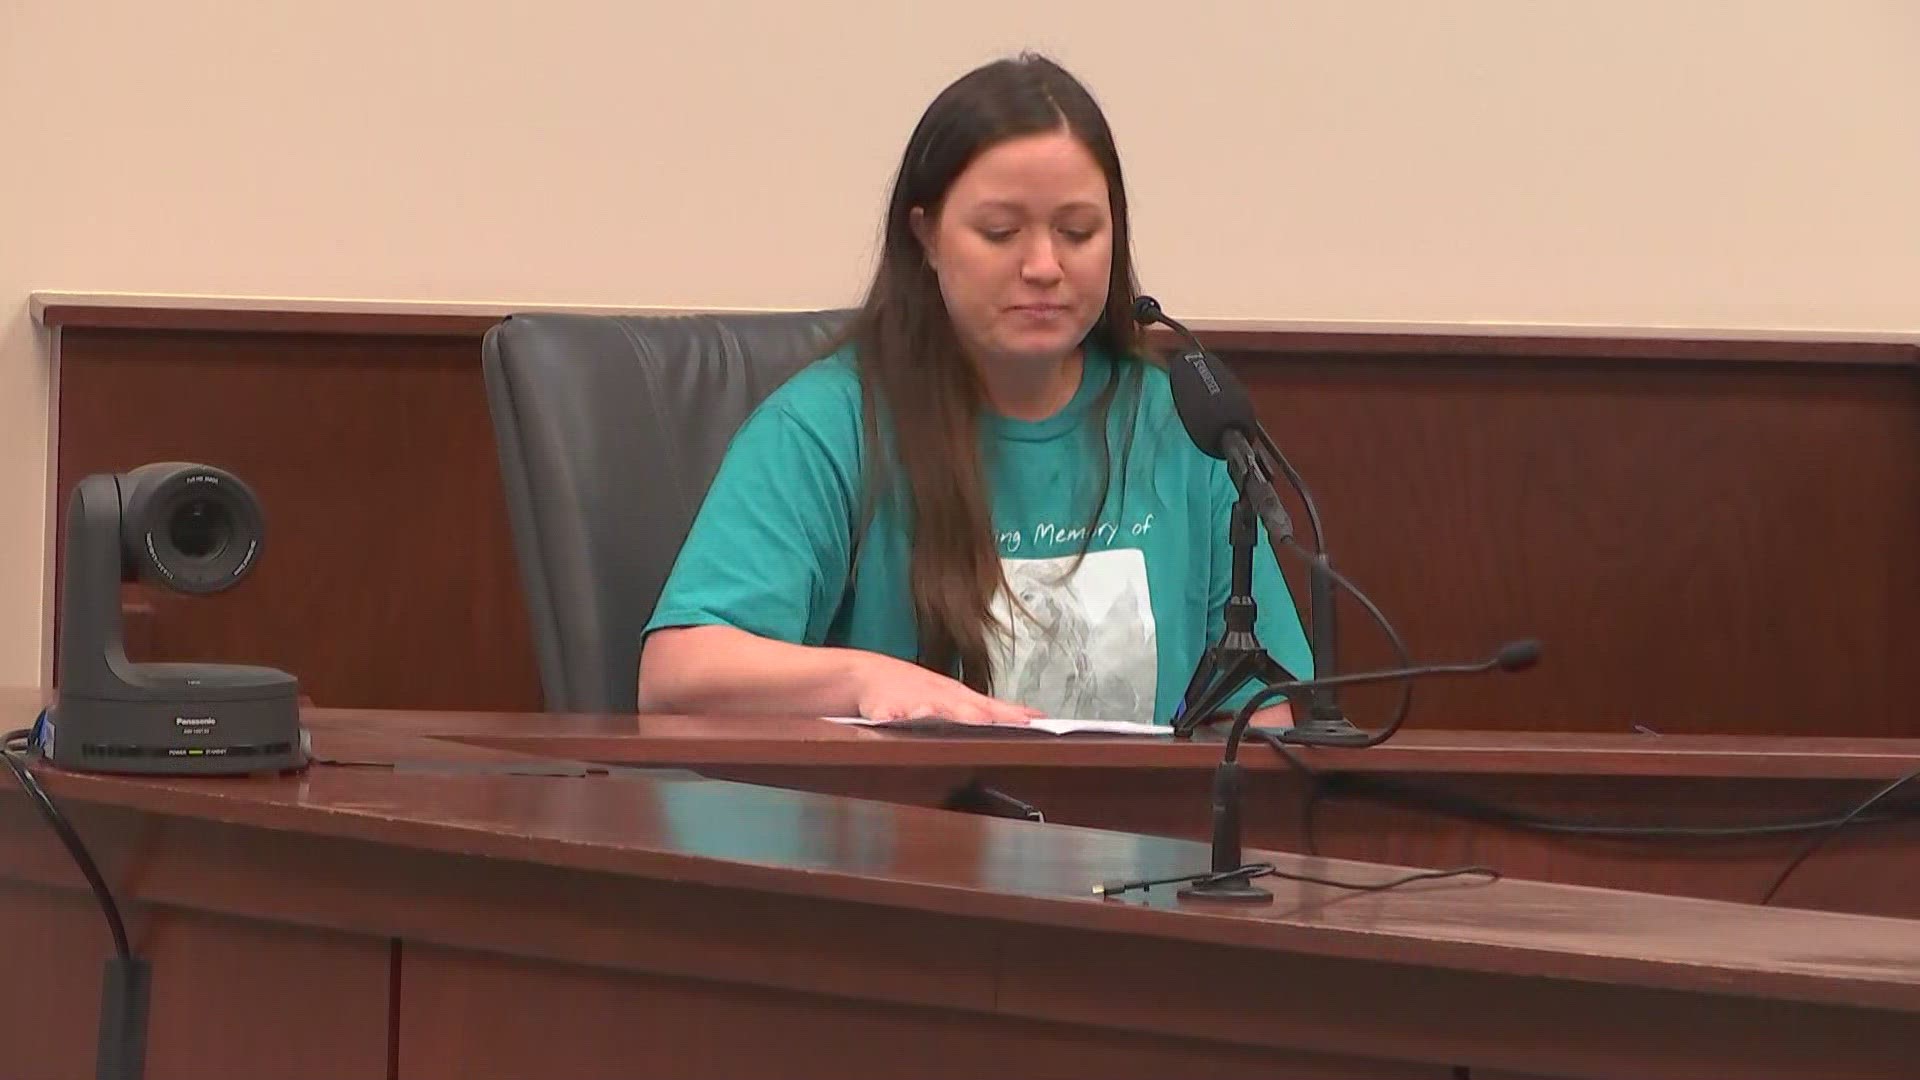 Breanna Cherry spoke to the court during Aiden Fucci's sentencing hearing for the murder of Tristyn Bailey. She coached Tristyn's team of 8 through 13 year olds.